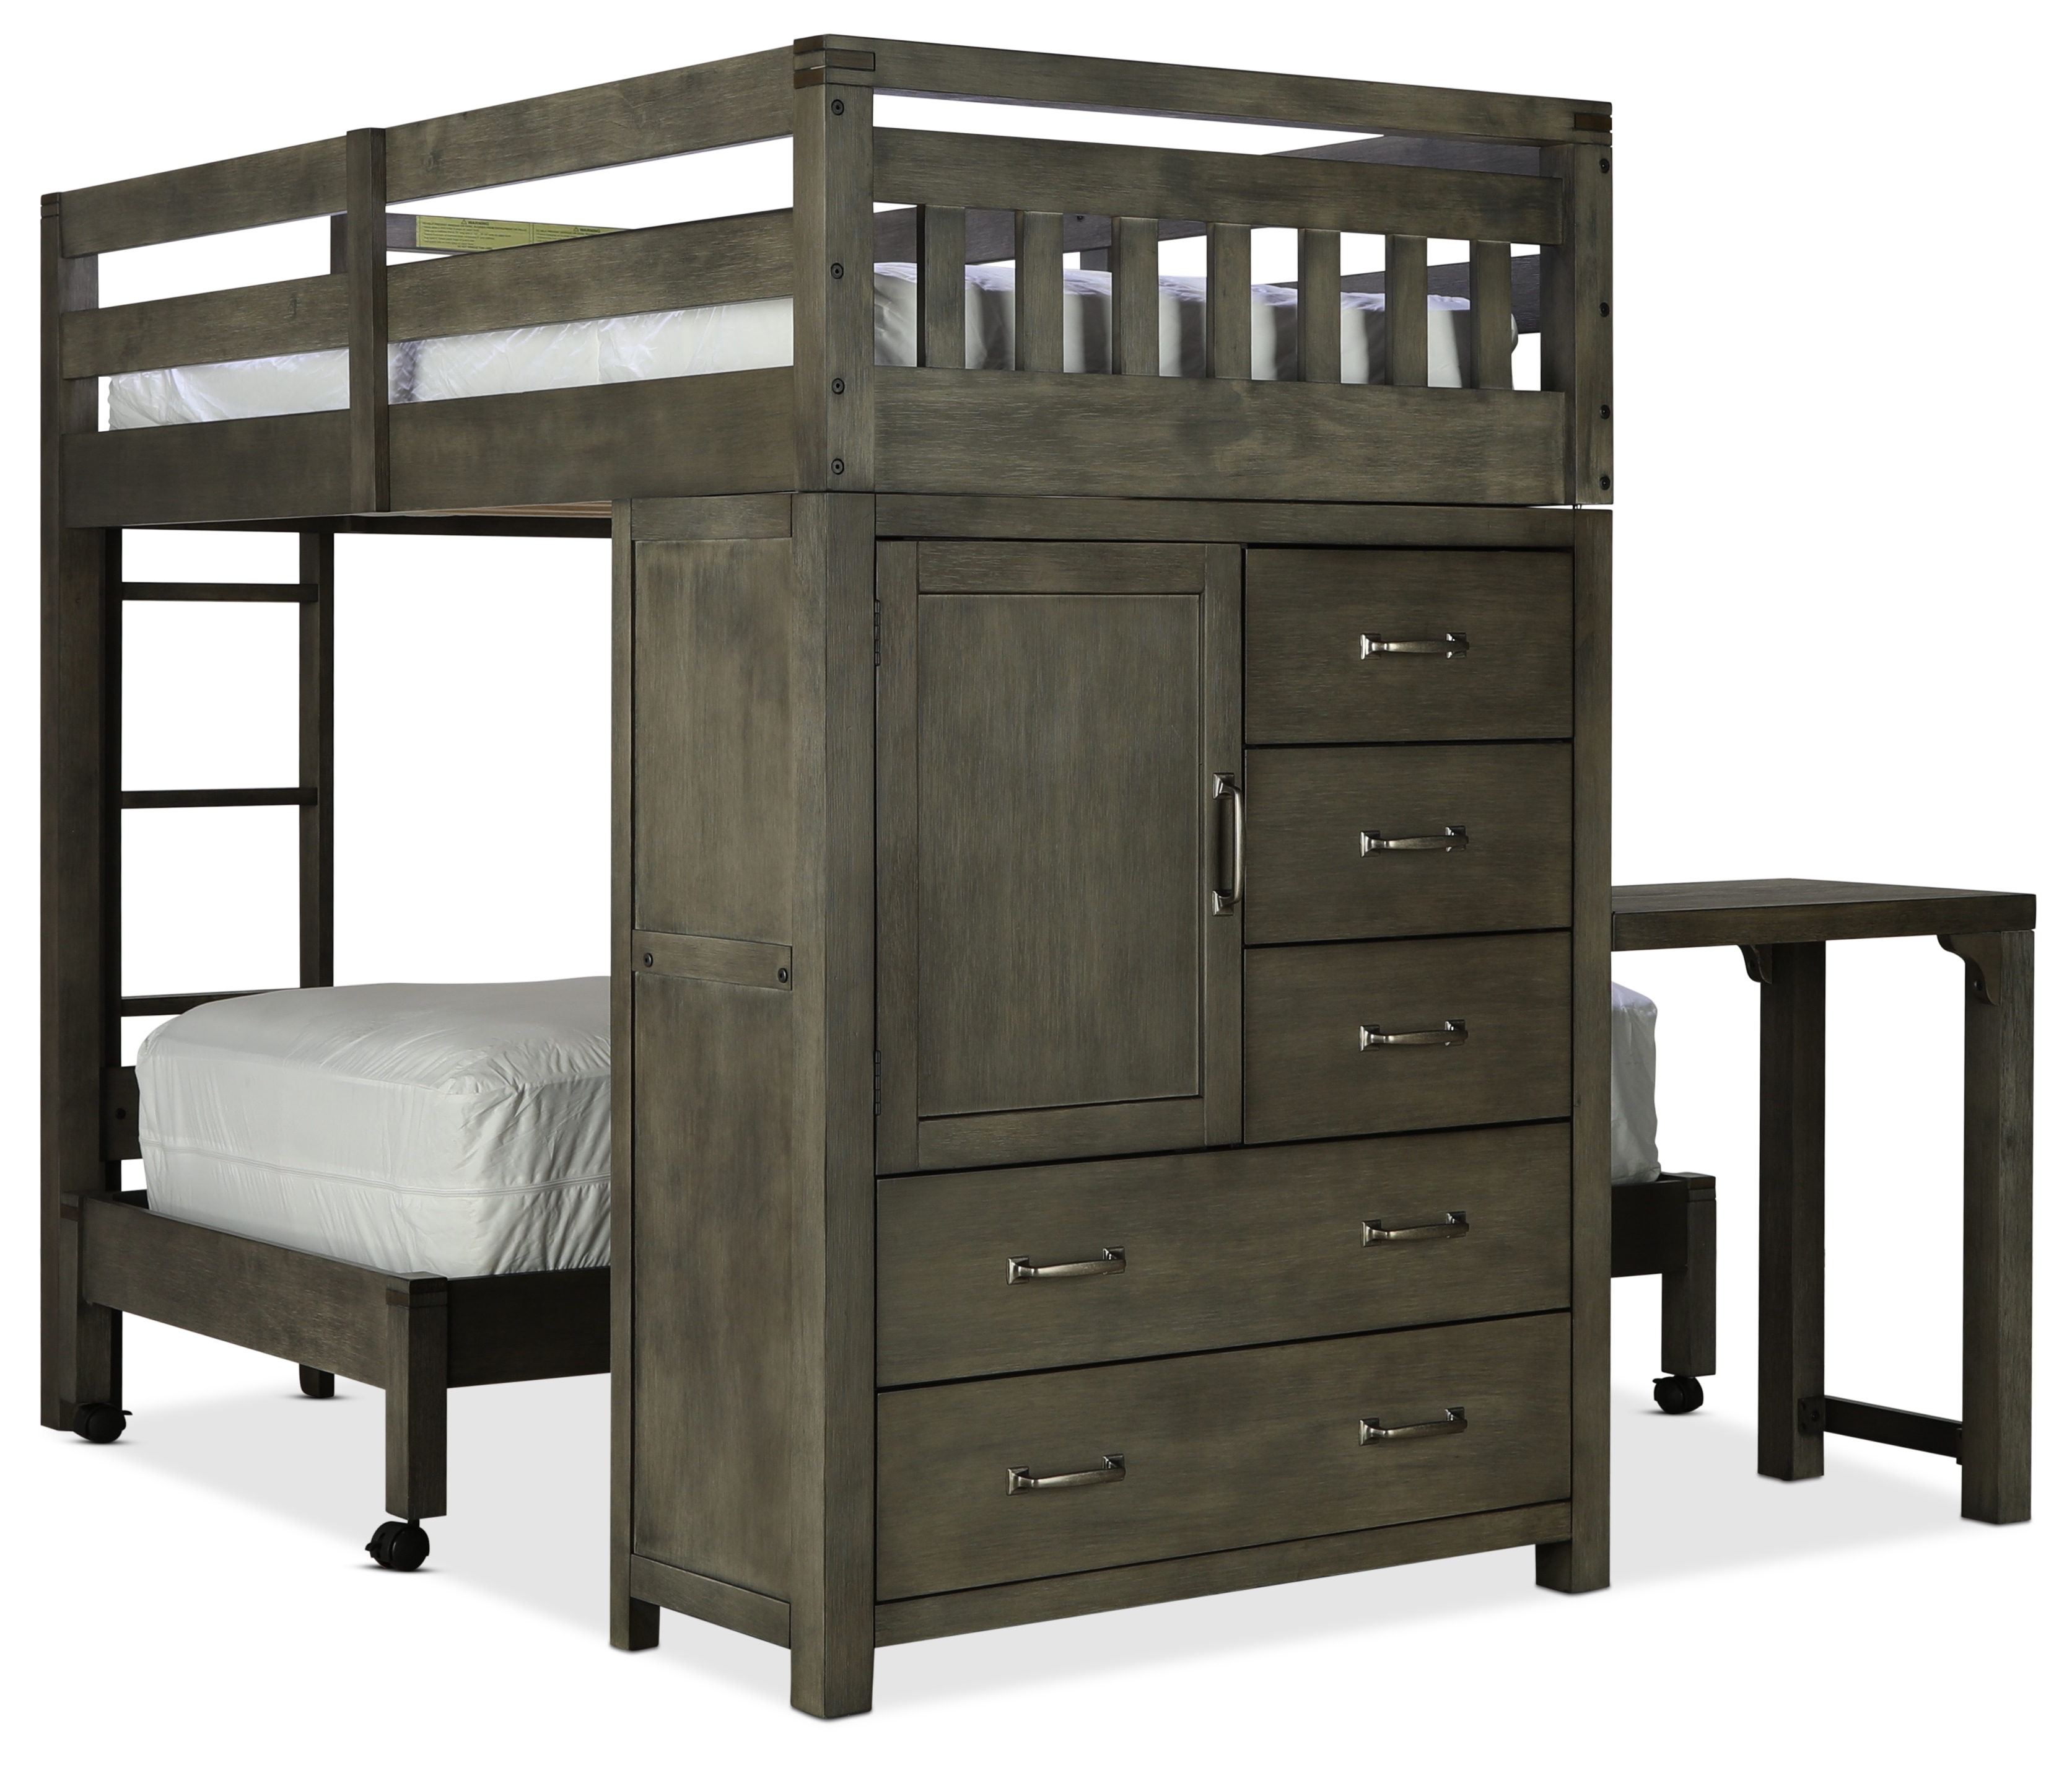 St Croix Twin Loft Bed Charcoal, Broyhill Bunk Beds